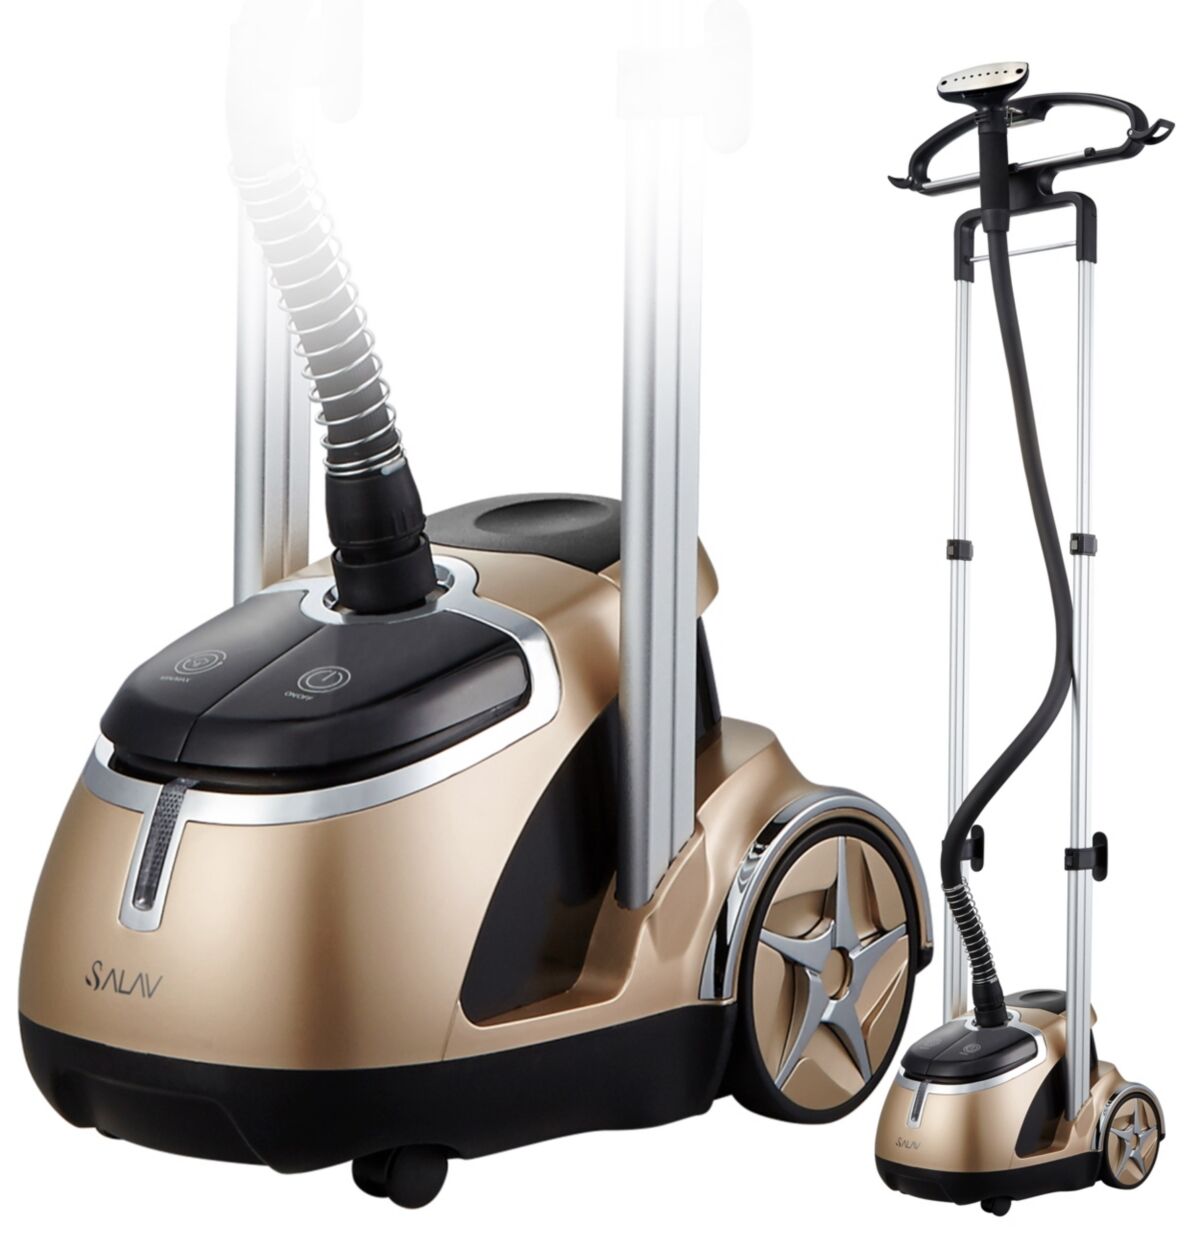 Salav Professional Garment Steamer with Retractable Power Cord and Foot Pedal Control, GS49-dj - Gold